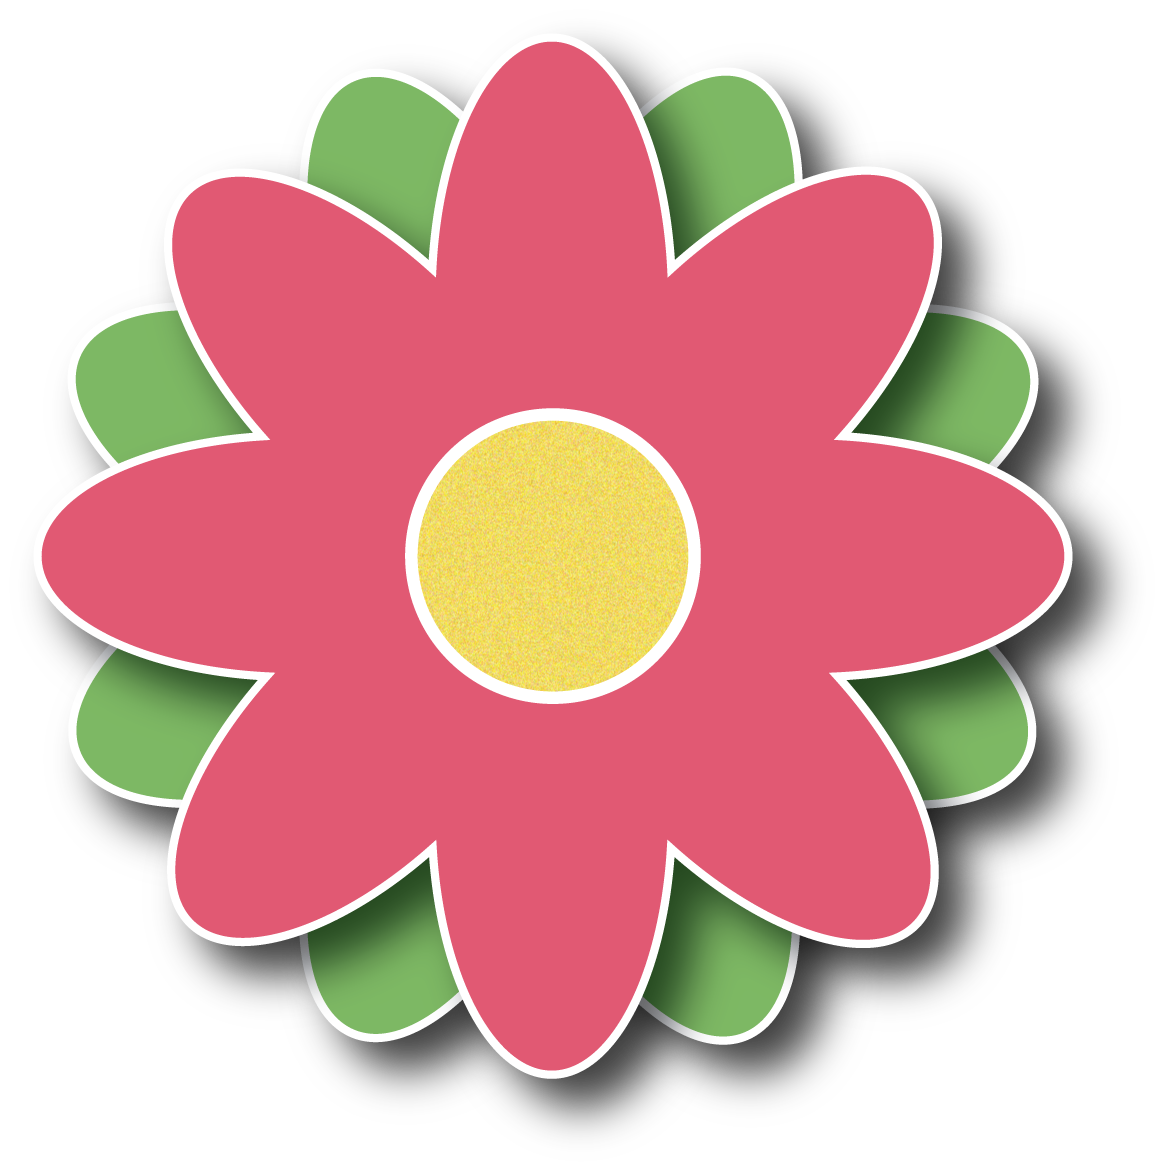 flower clipart download free - photo #49